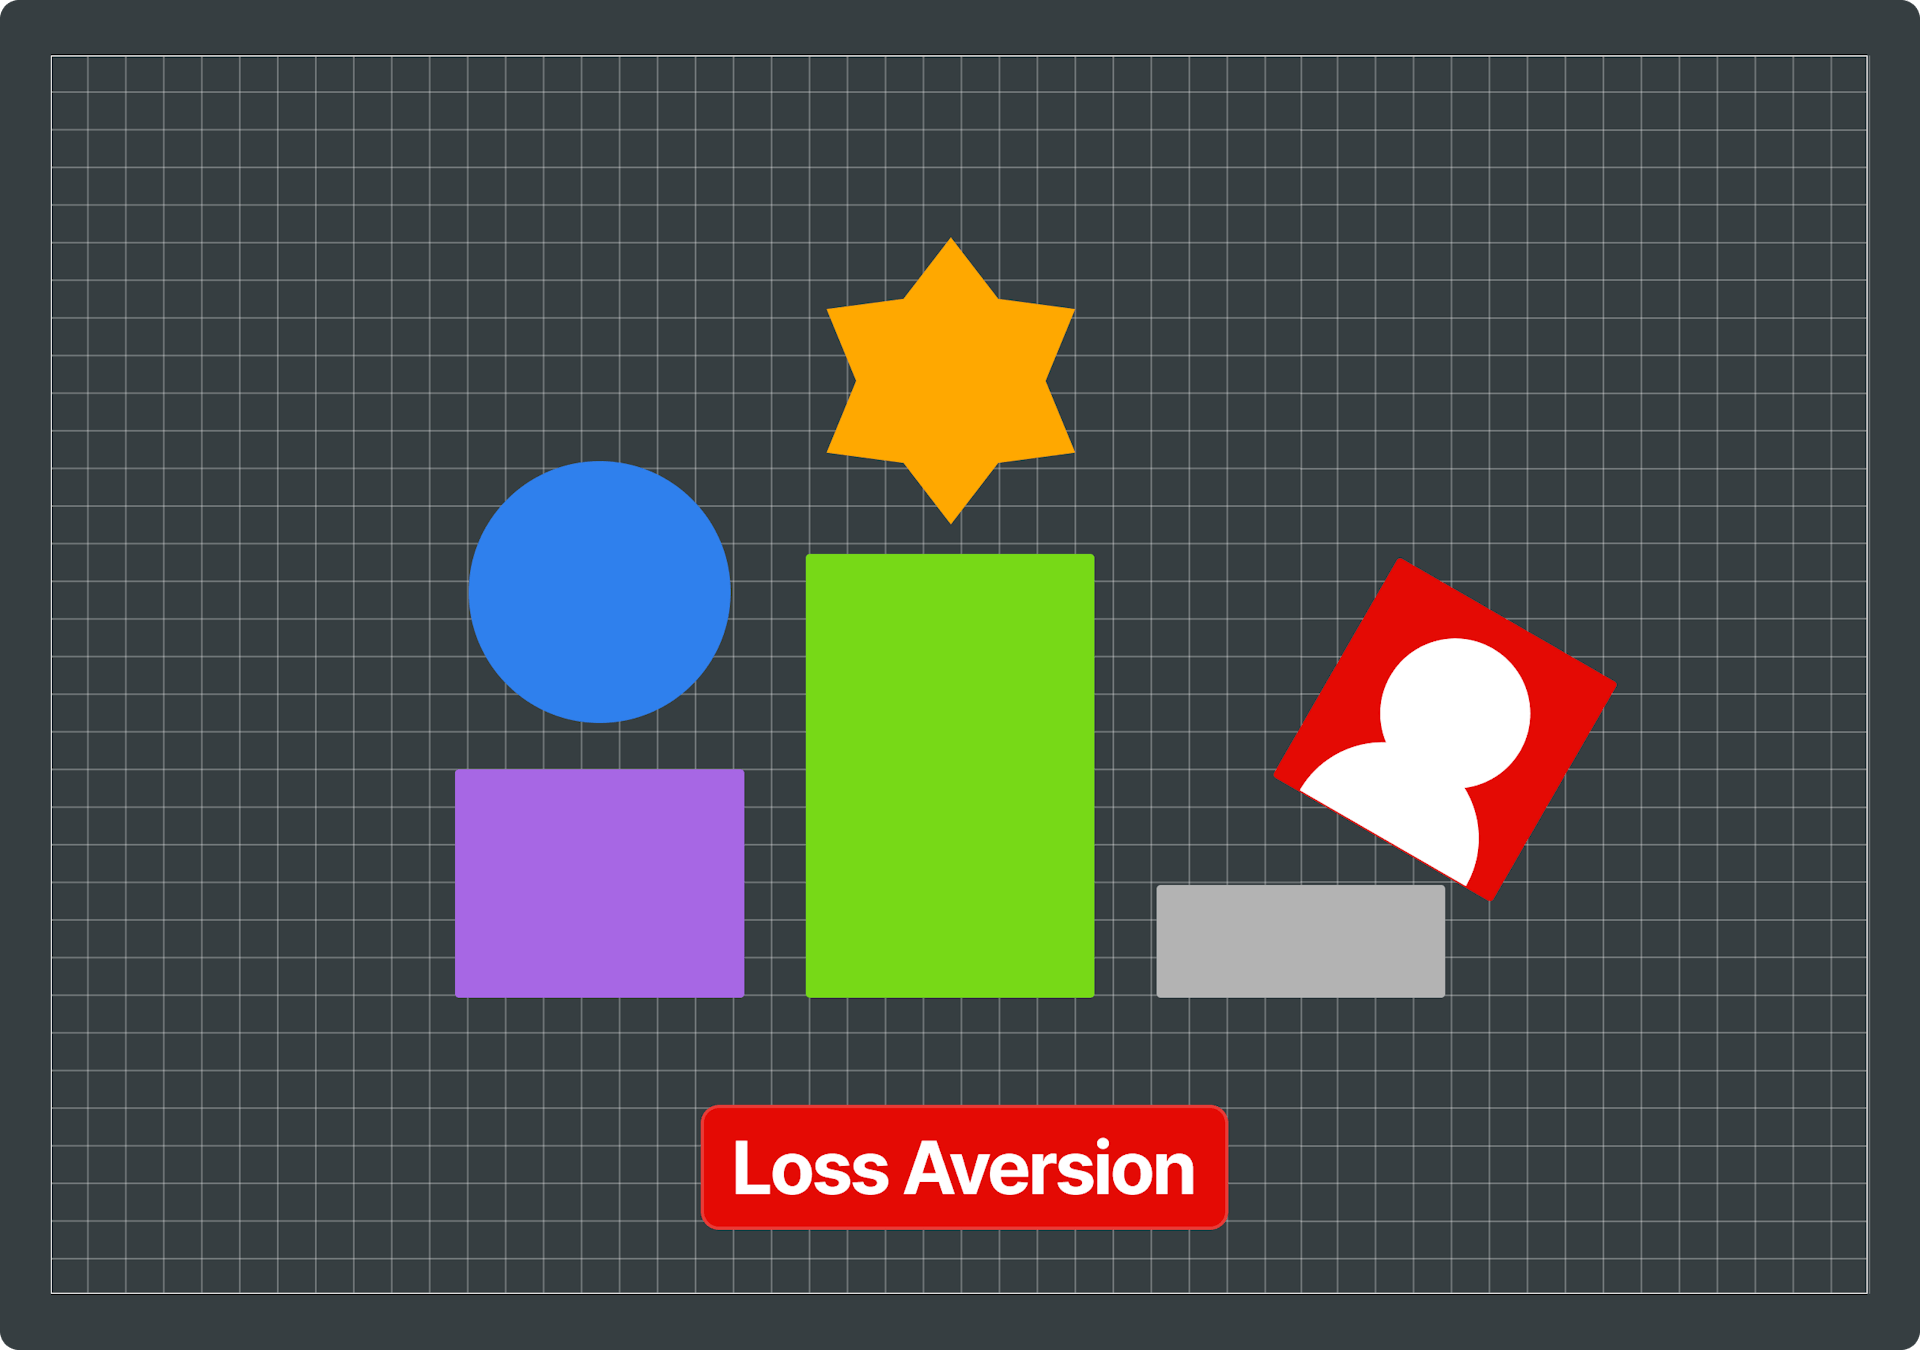 Illustration that resembles first, second and third place podiums. Includes text that says Loss Aversion.